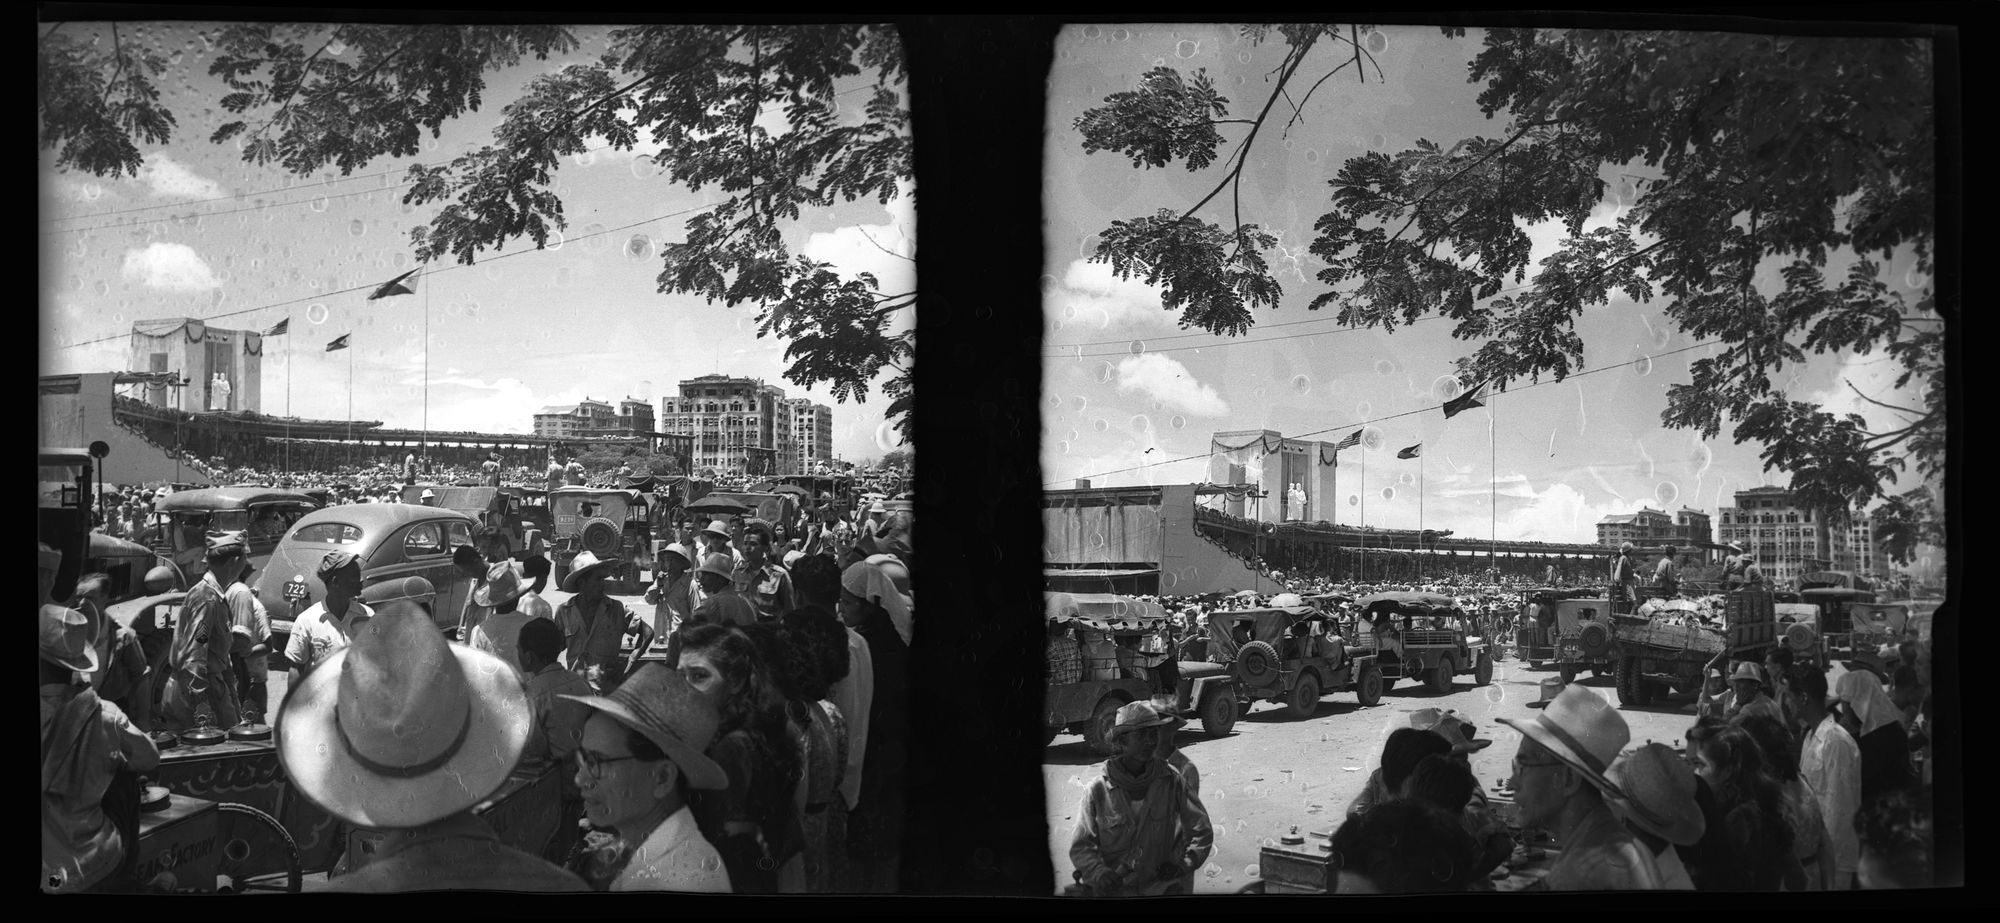 A black-and-white dyptich photograph that depicts the ceremony that celebrates the end of US colonization of the Philippine Islands on July 4, 1946. The photograph is taken from within the crowd, who are in the foreground looking out into the ceremony.